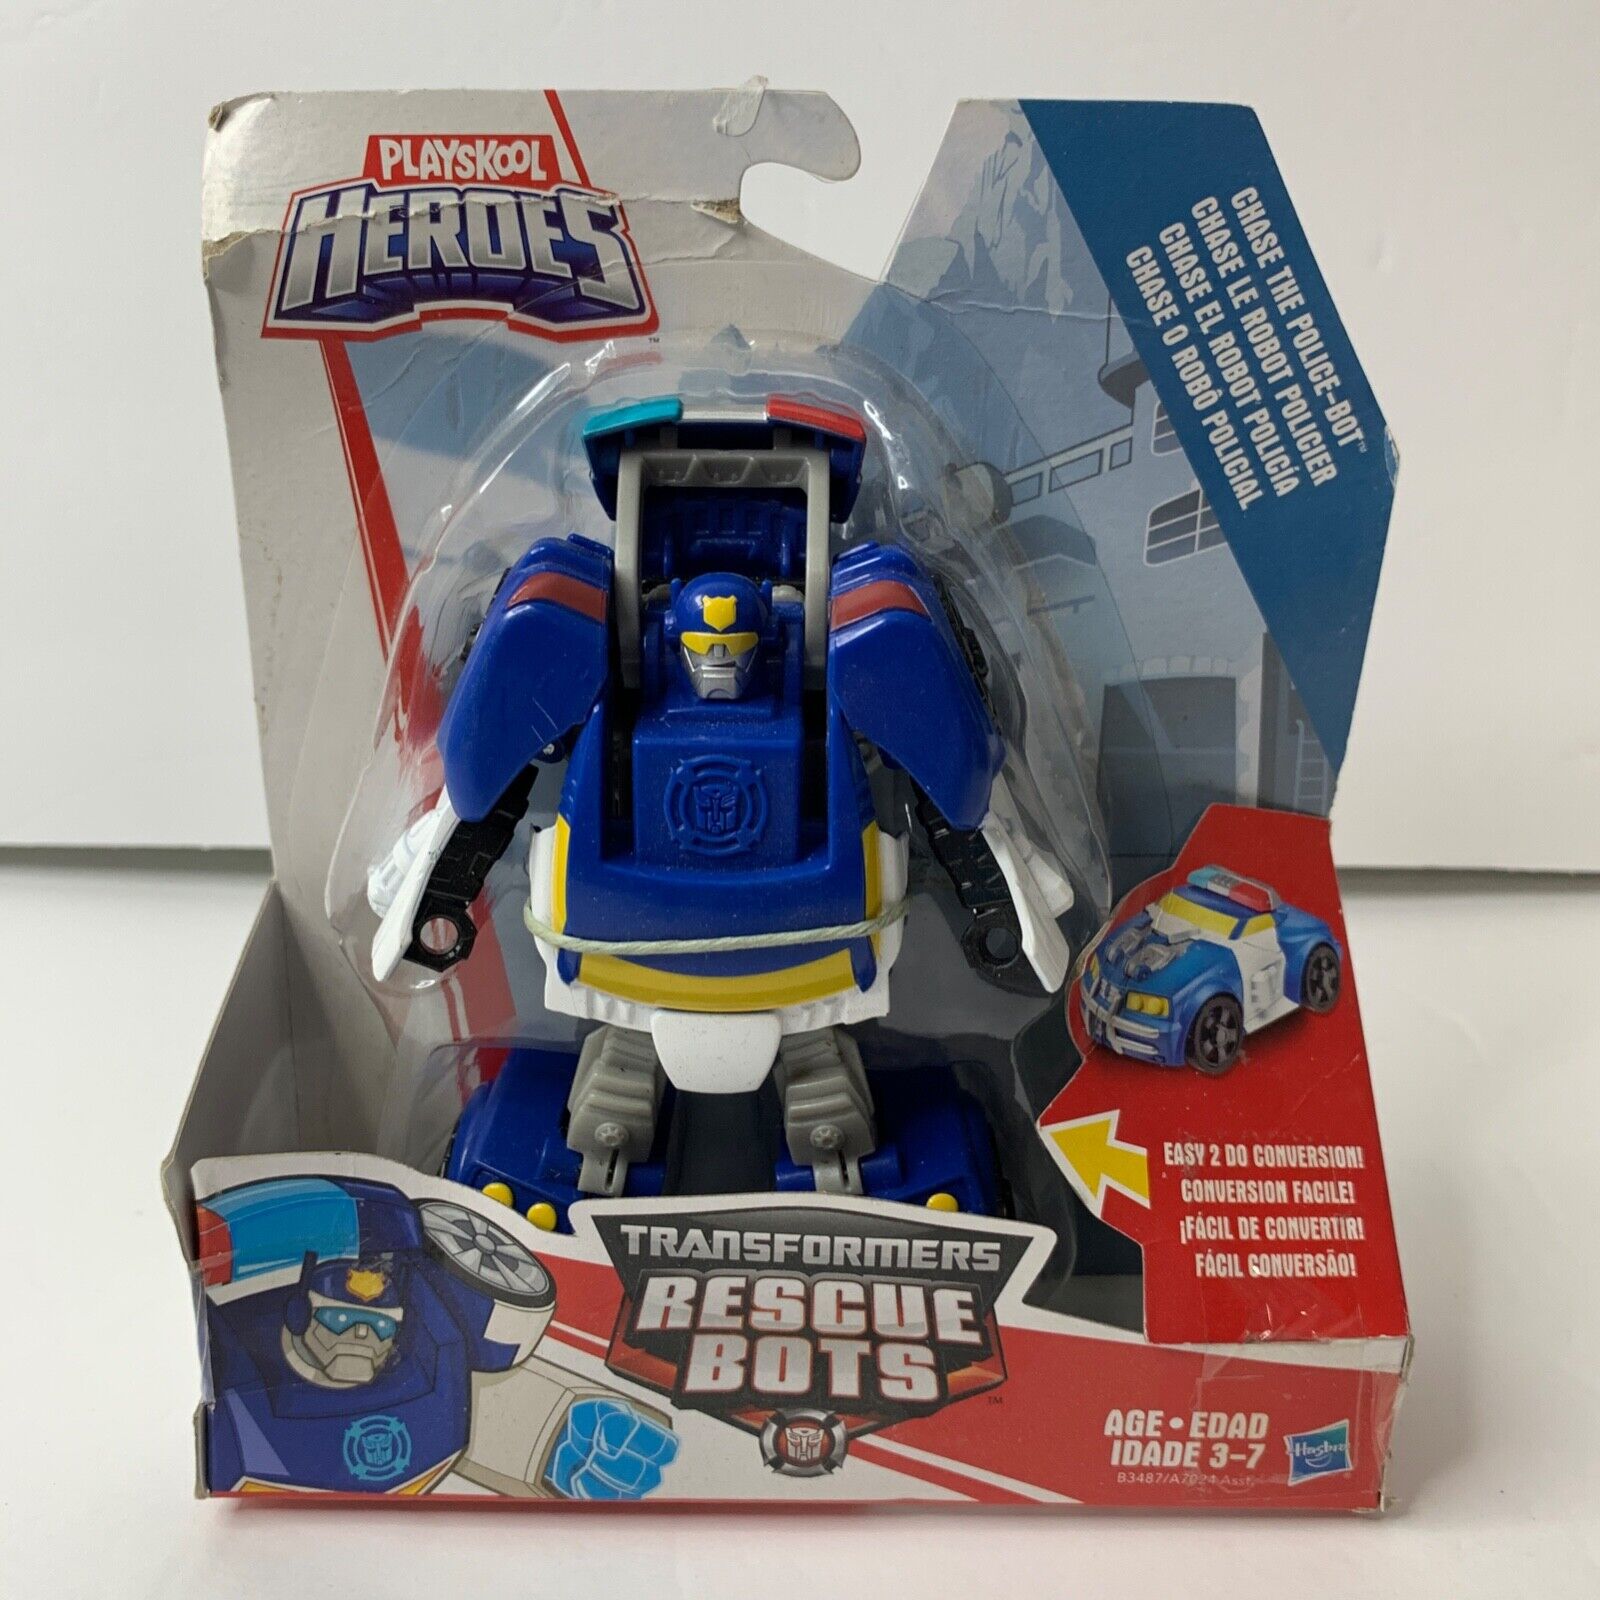 PlaySkool Heroes Transformers Rescue Bots Blue Police Race Car Robot - NEW